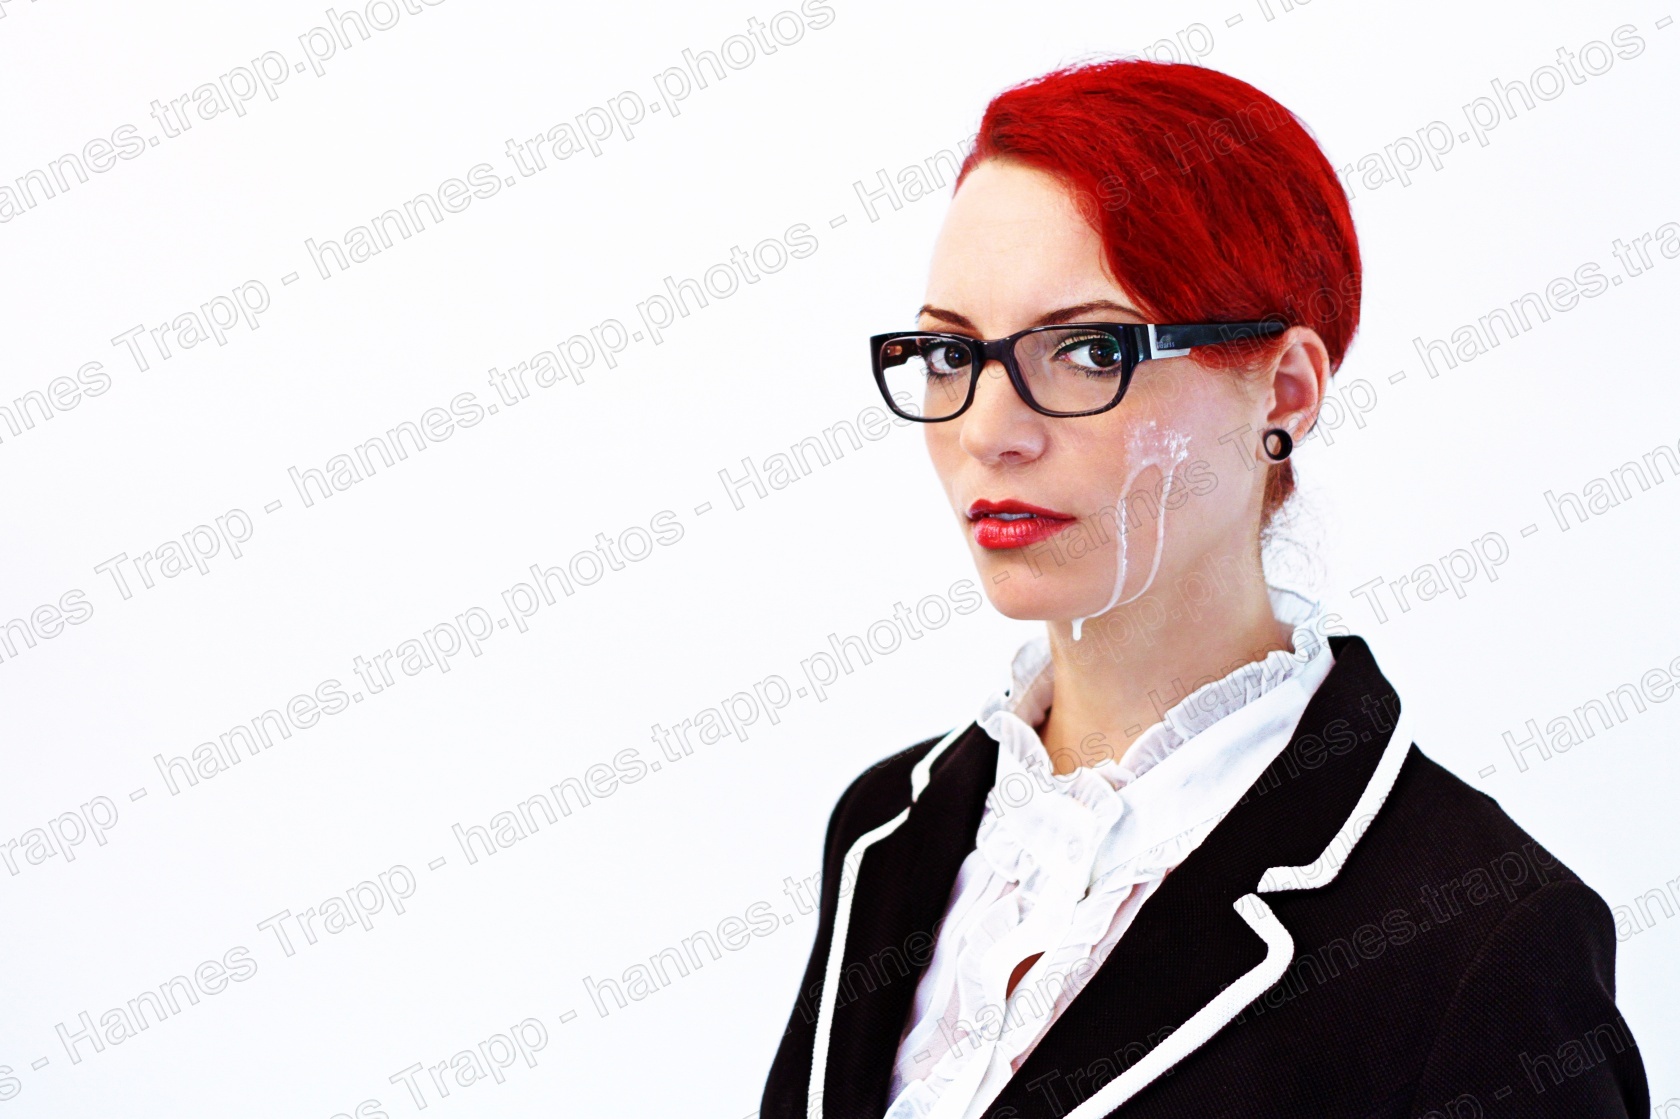 Foto: Something 'bout Business Portraits